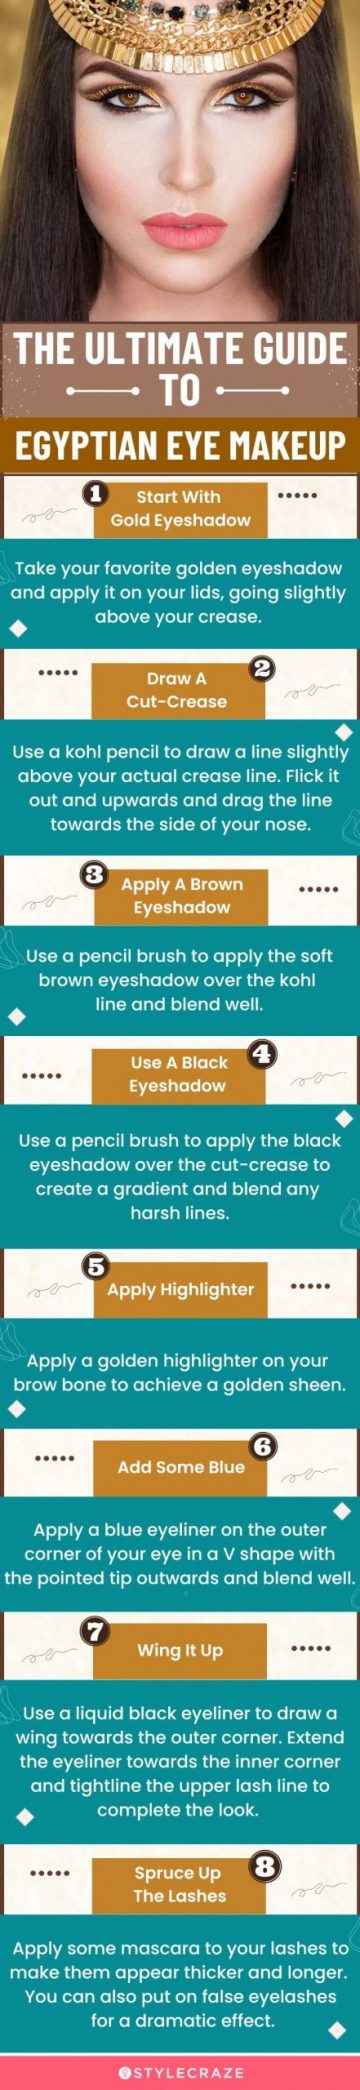 the ultimate guide to egyptian eye makeup (infographic)